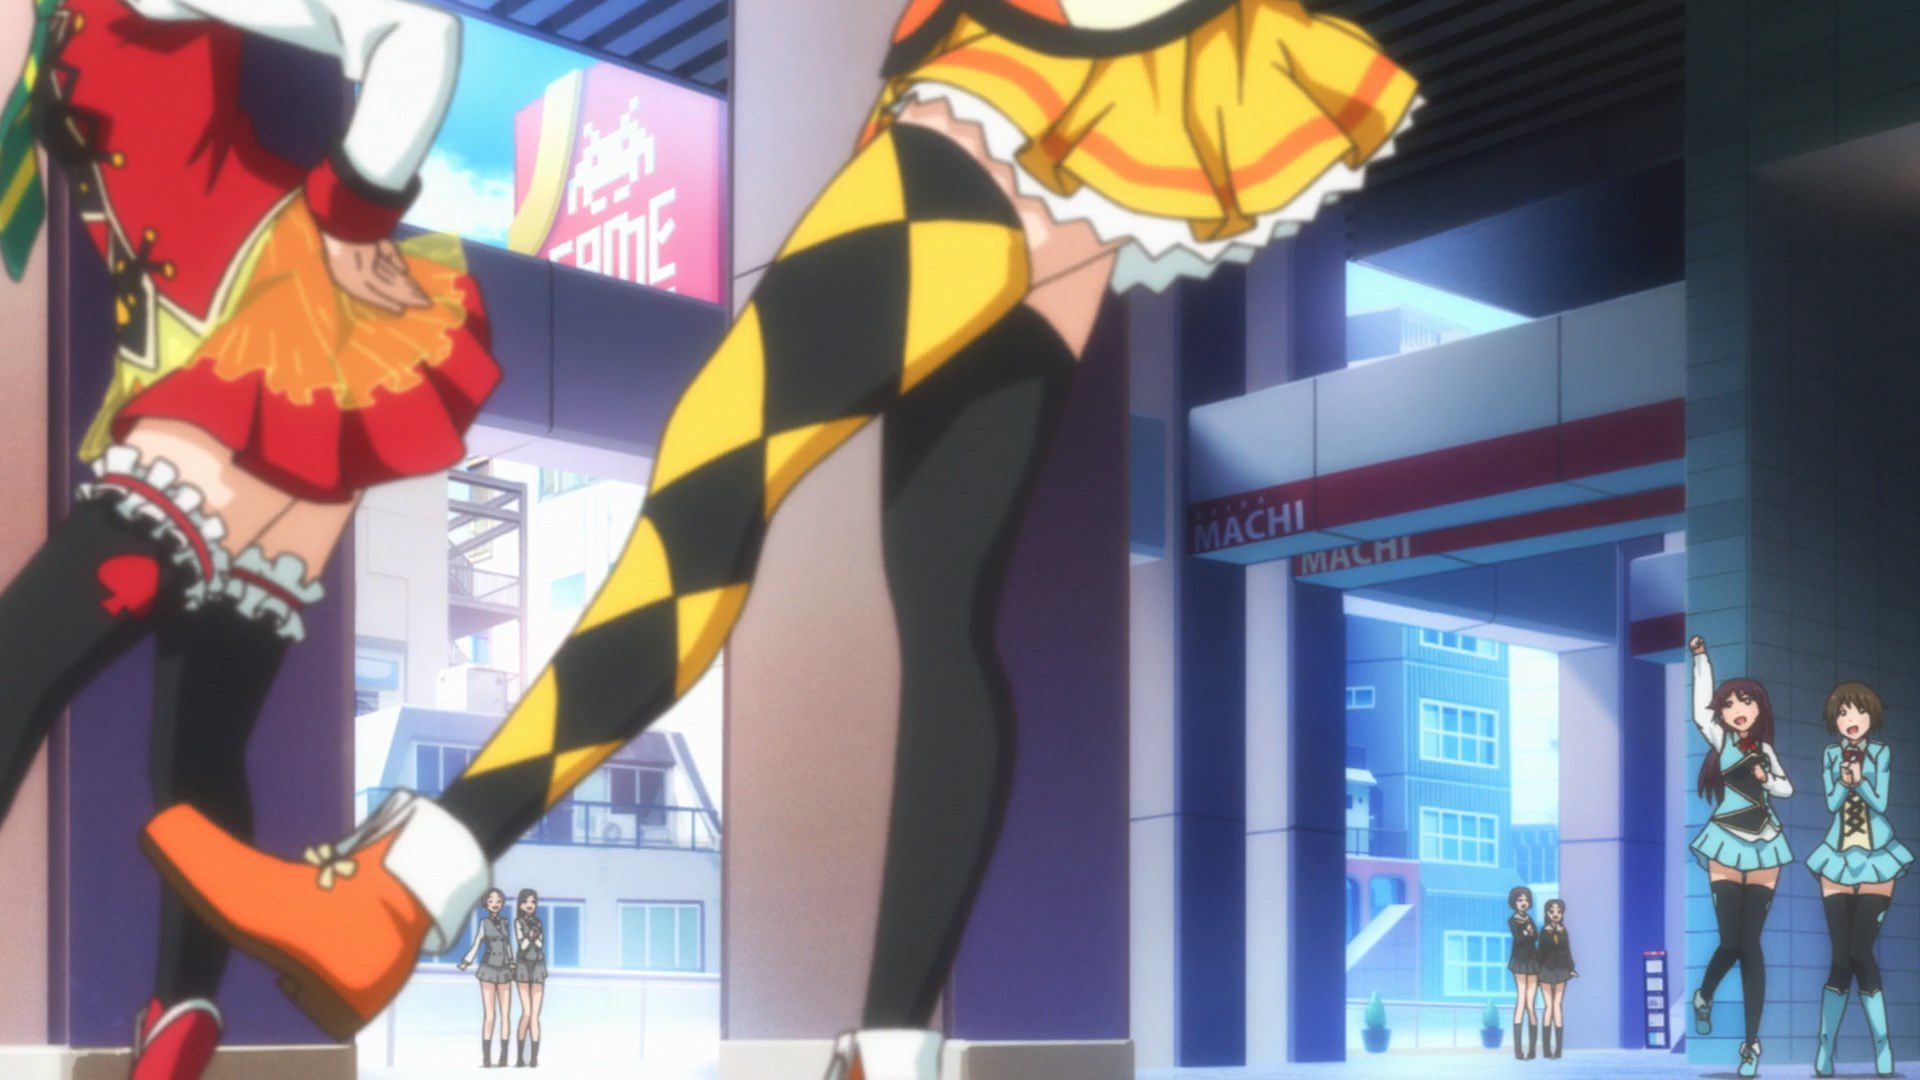 [God images] "love live! ' Μm ' PV's leg is too erotic everyone wakes up to a leg fetish of wwwww 100